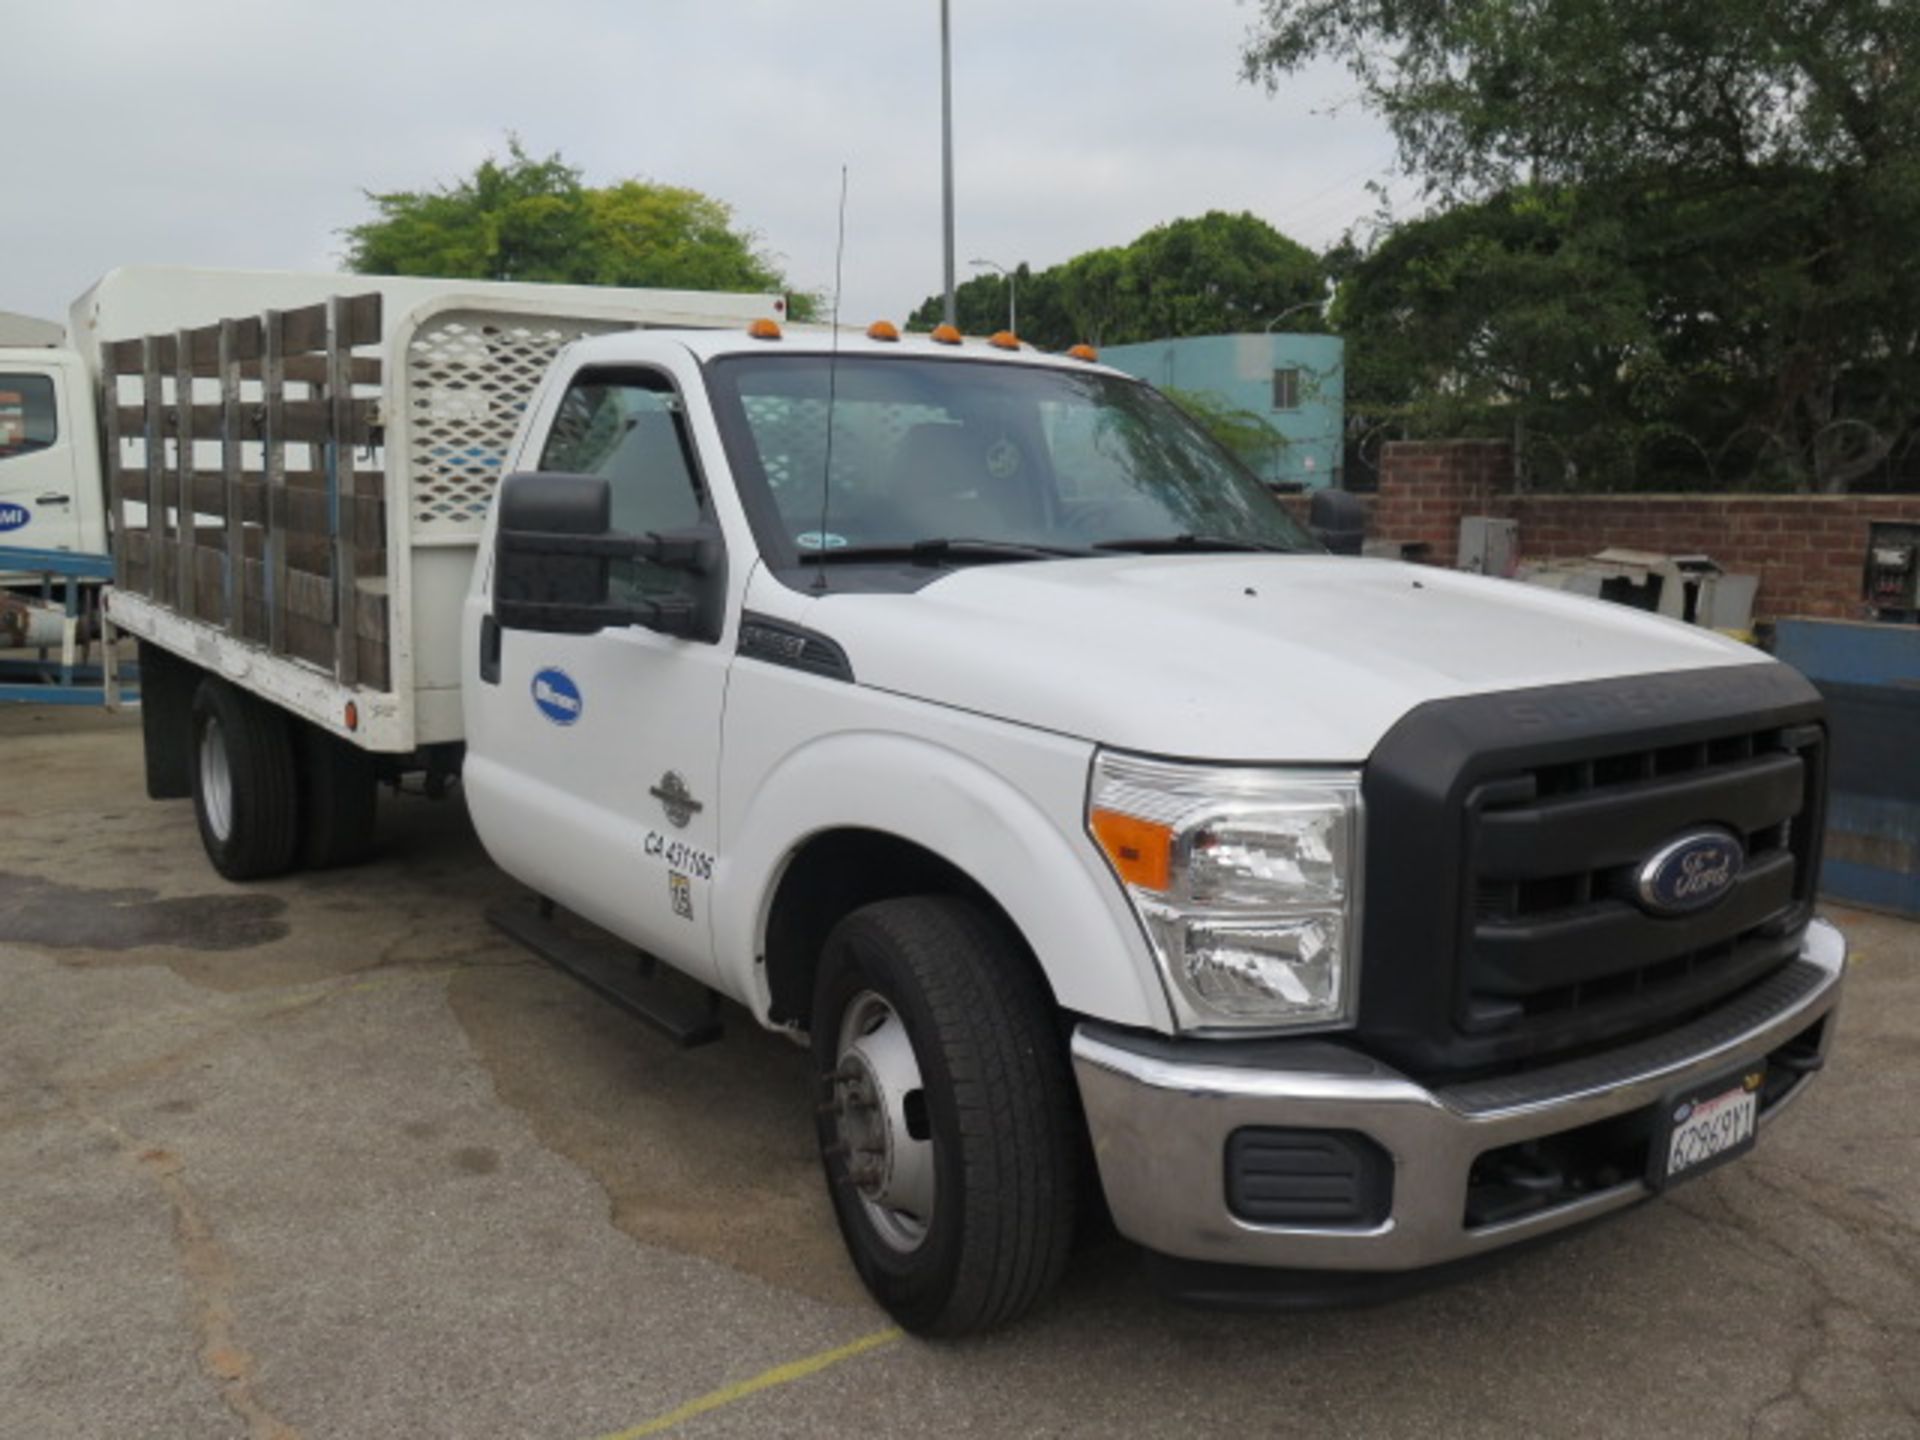 2015 Ford F-350 Super Duty 12’ Stake-Bed Truck Lisc# 62969Y1 w/ 6.7L Turbo Diesel Power Stroke B20 - Image 11 of 25